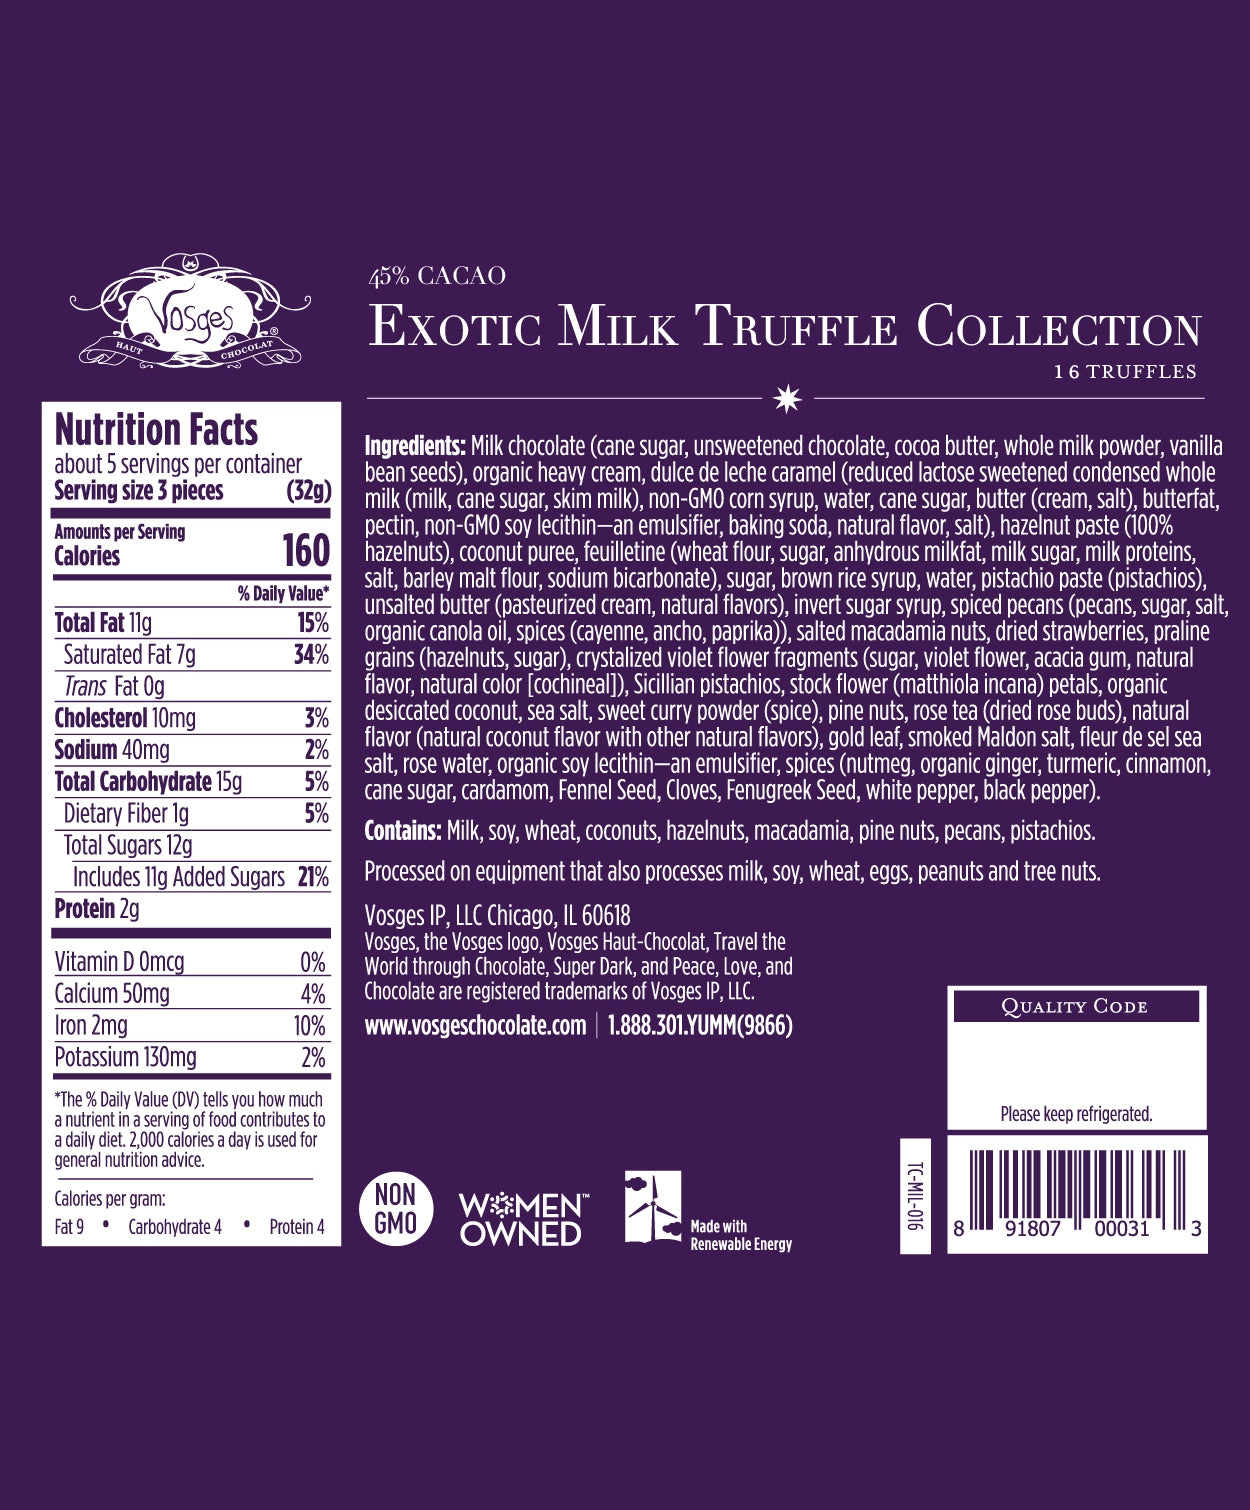 Nutrition Facts and Ingredients of Vosges Haut-Chocolat sixteen piece Milk Chocolate Truffle Collection printed in white san-serif font on a dark purple background.